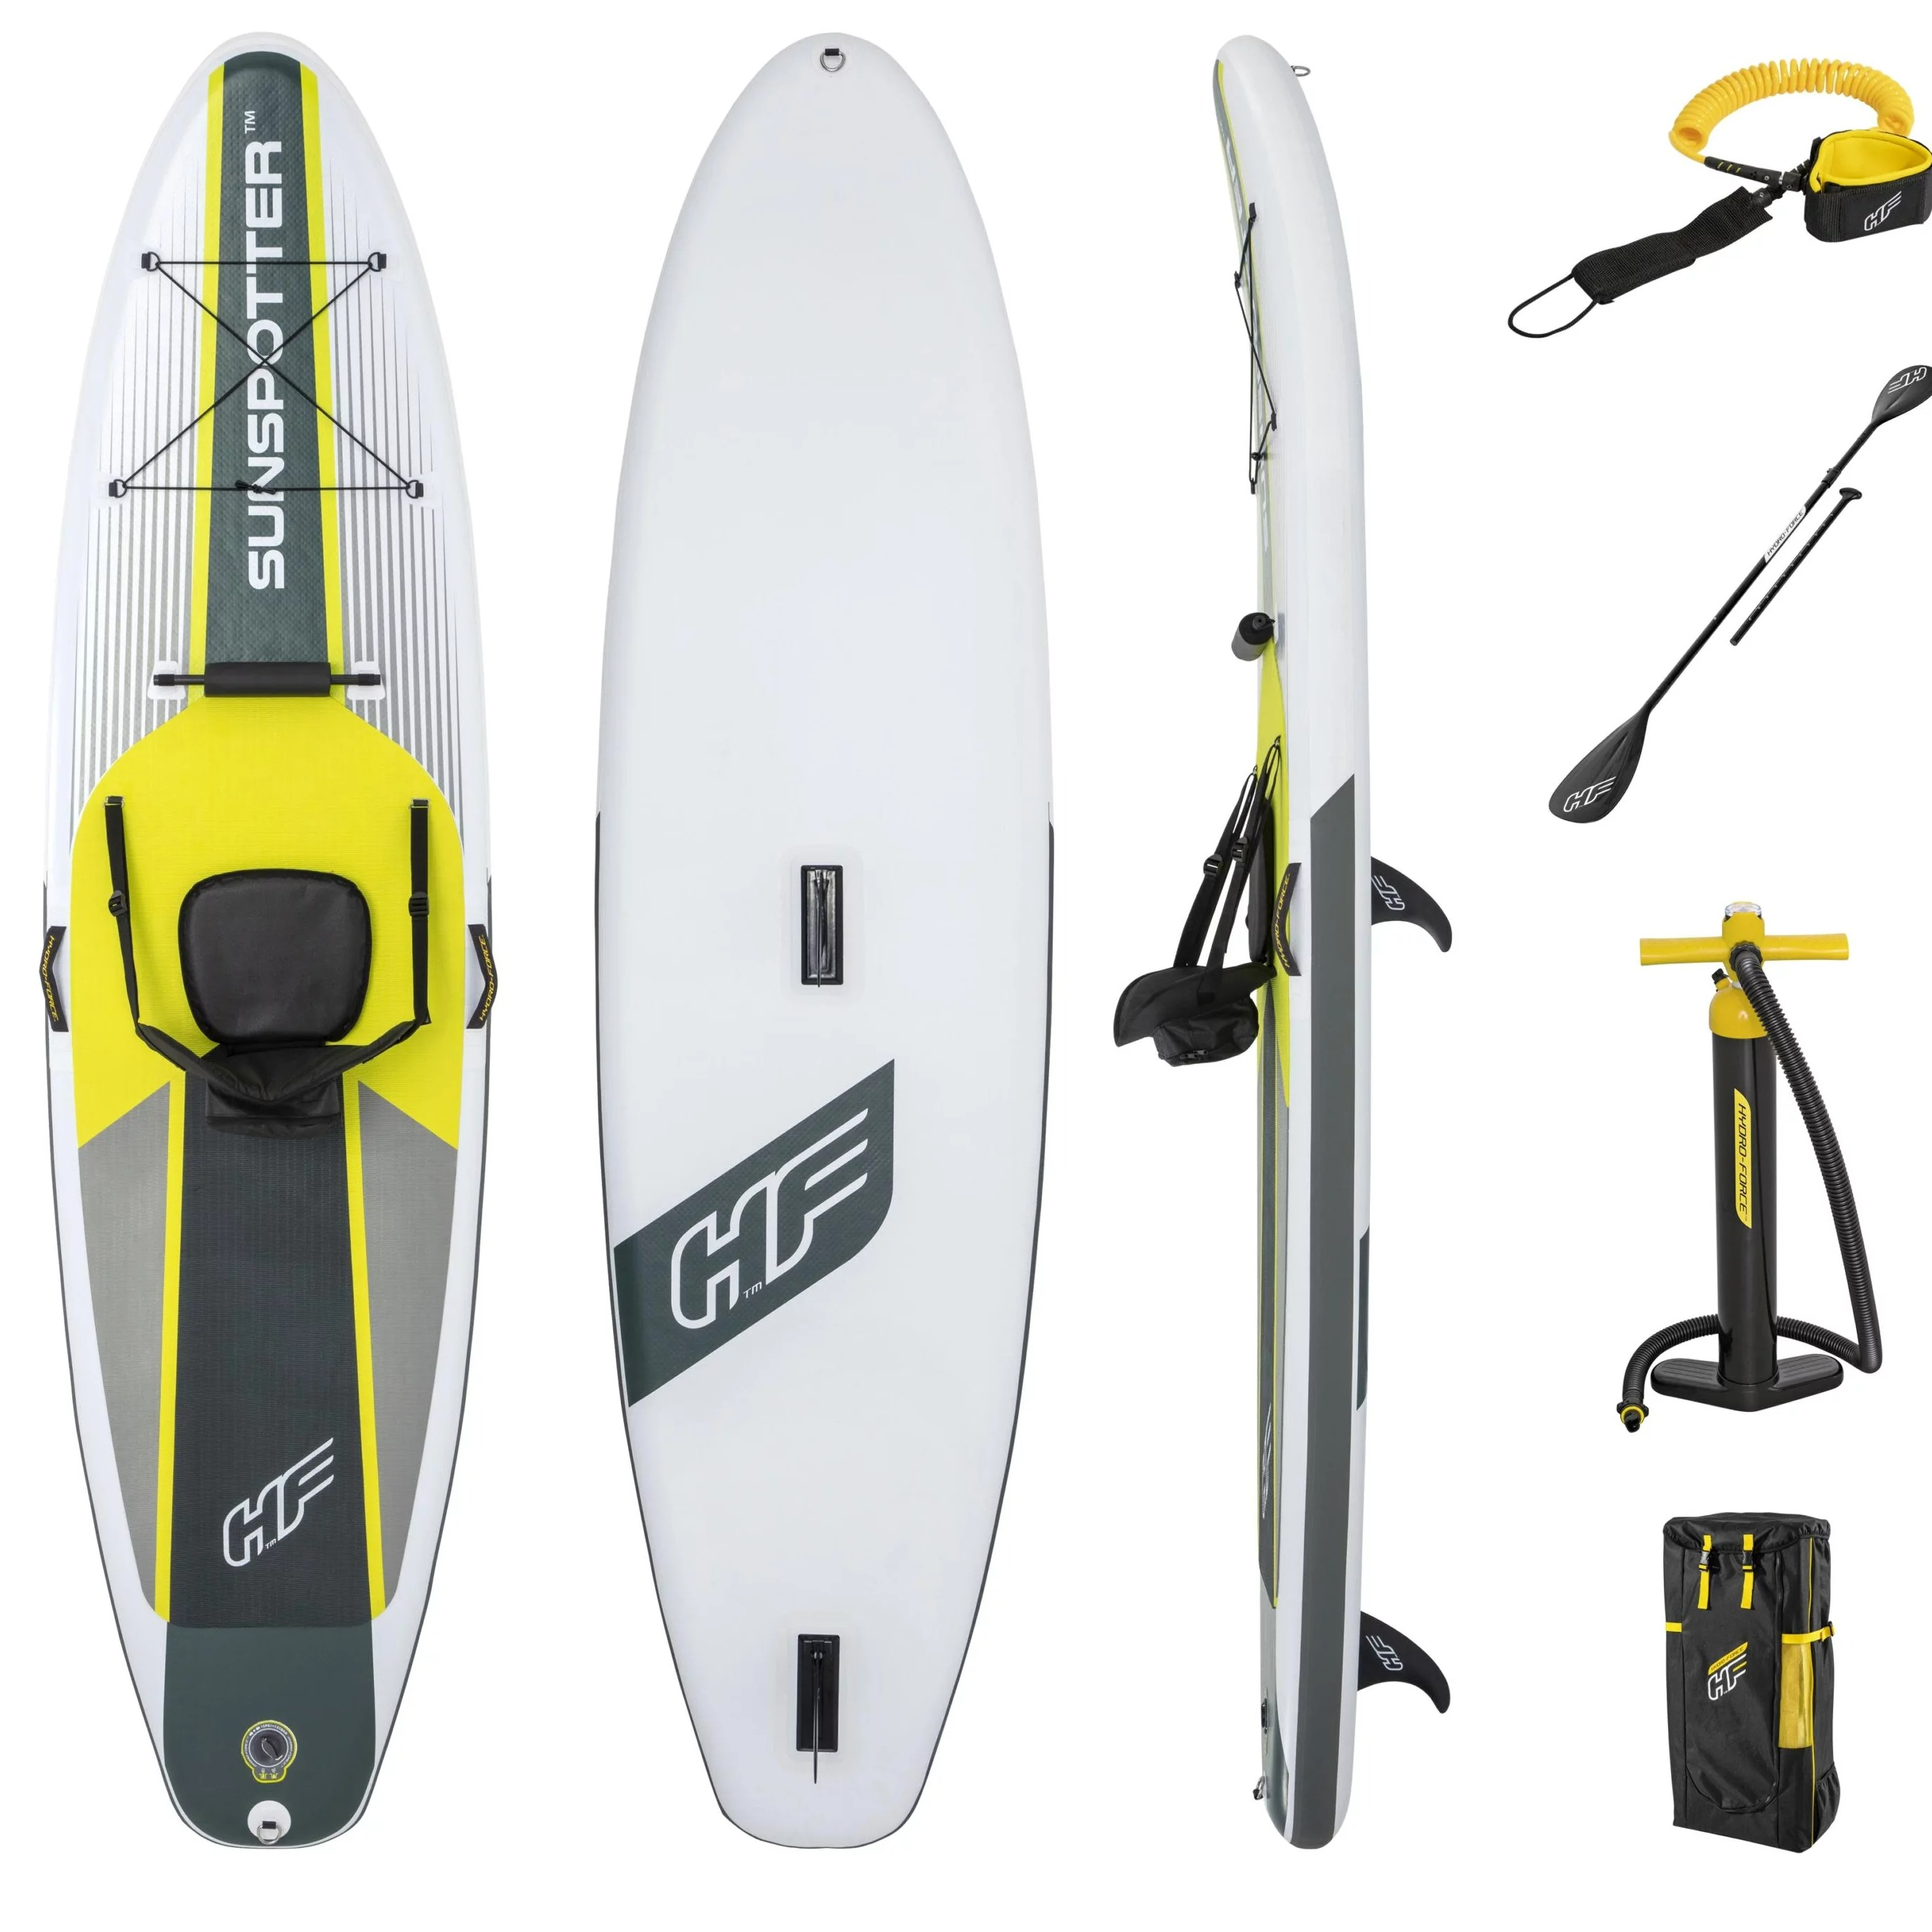 ihocon: Bestway Hydro-Force Sunspotter SUP 11 Ft. 2 In. Inflatable 2 in 1 Stand Up Paddle Board and Kayak  2合1 充氣立式槳板/划艇